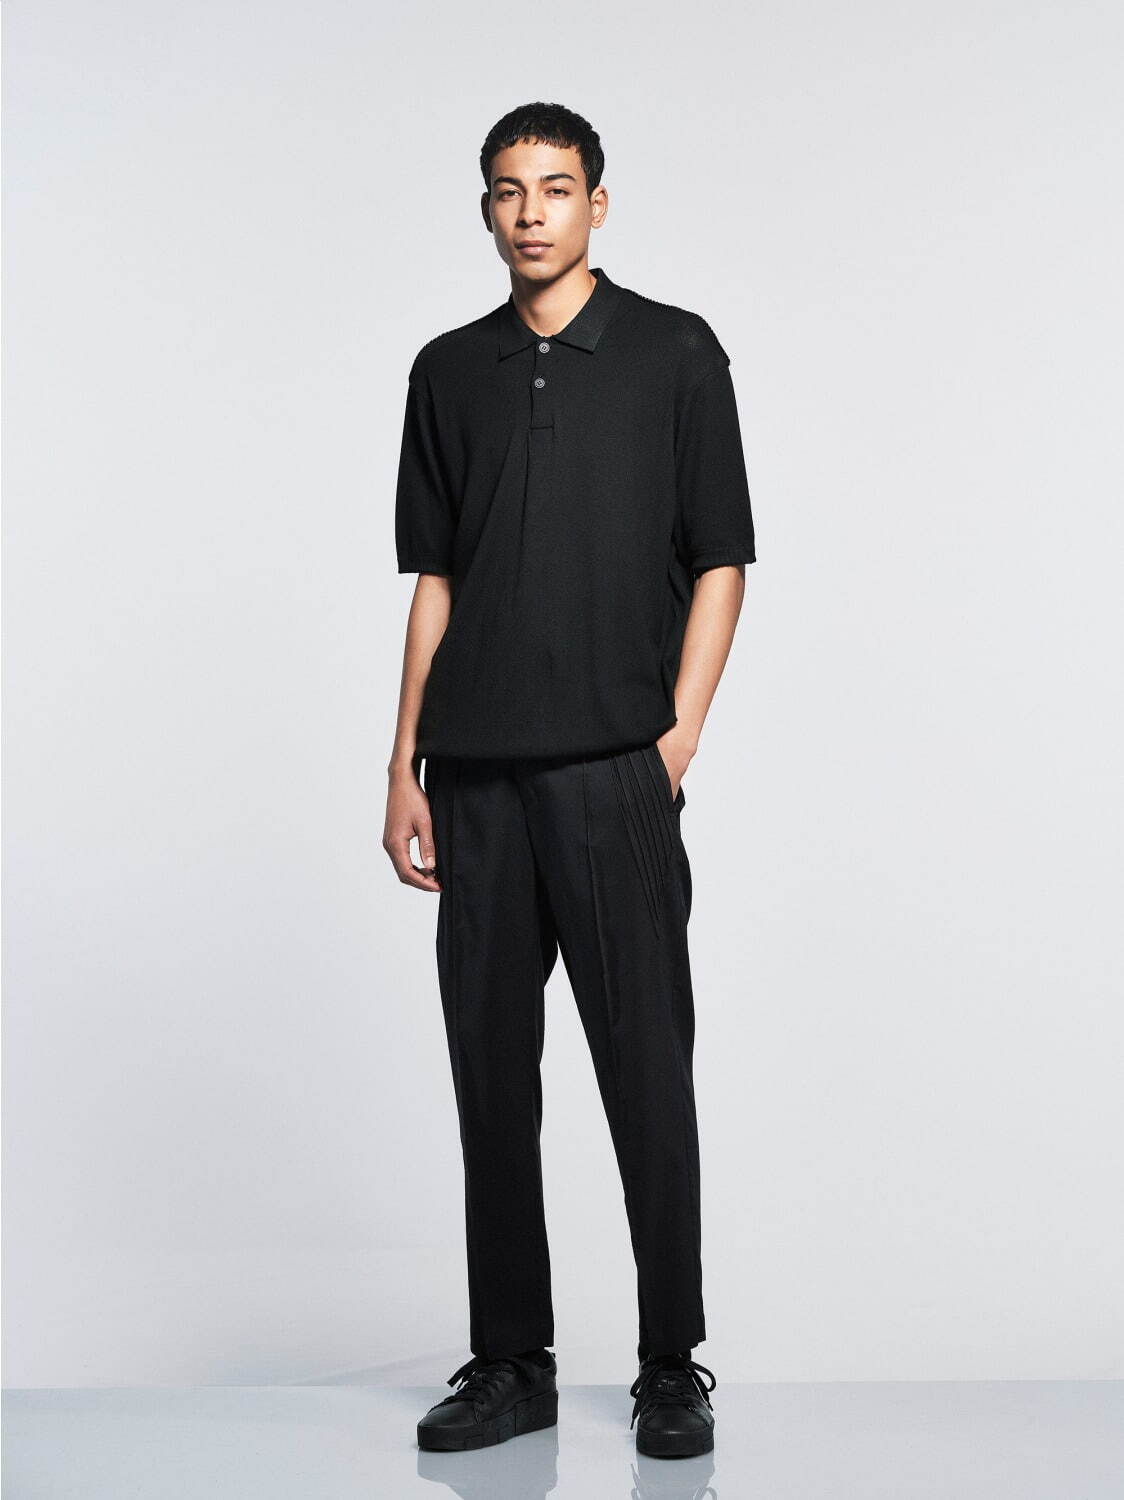 A-POC ABLE ISSEY MIYAKE Type-S セットアップ | www.reelemin242.com